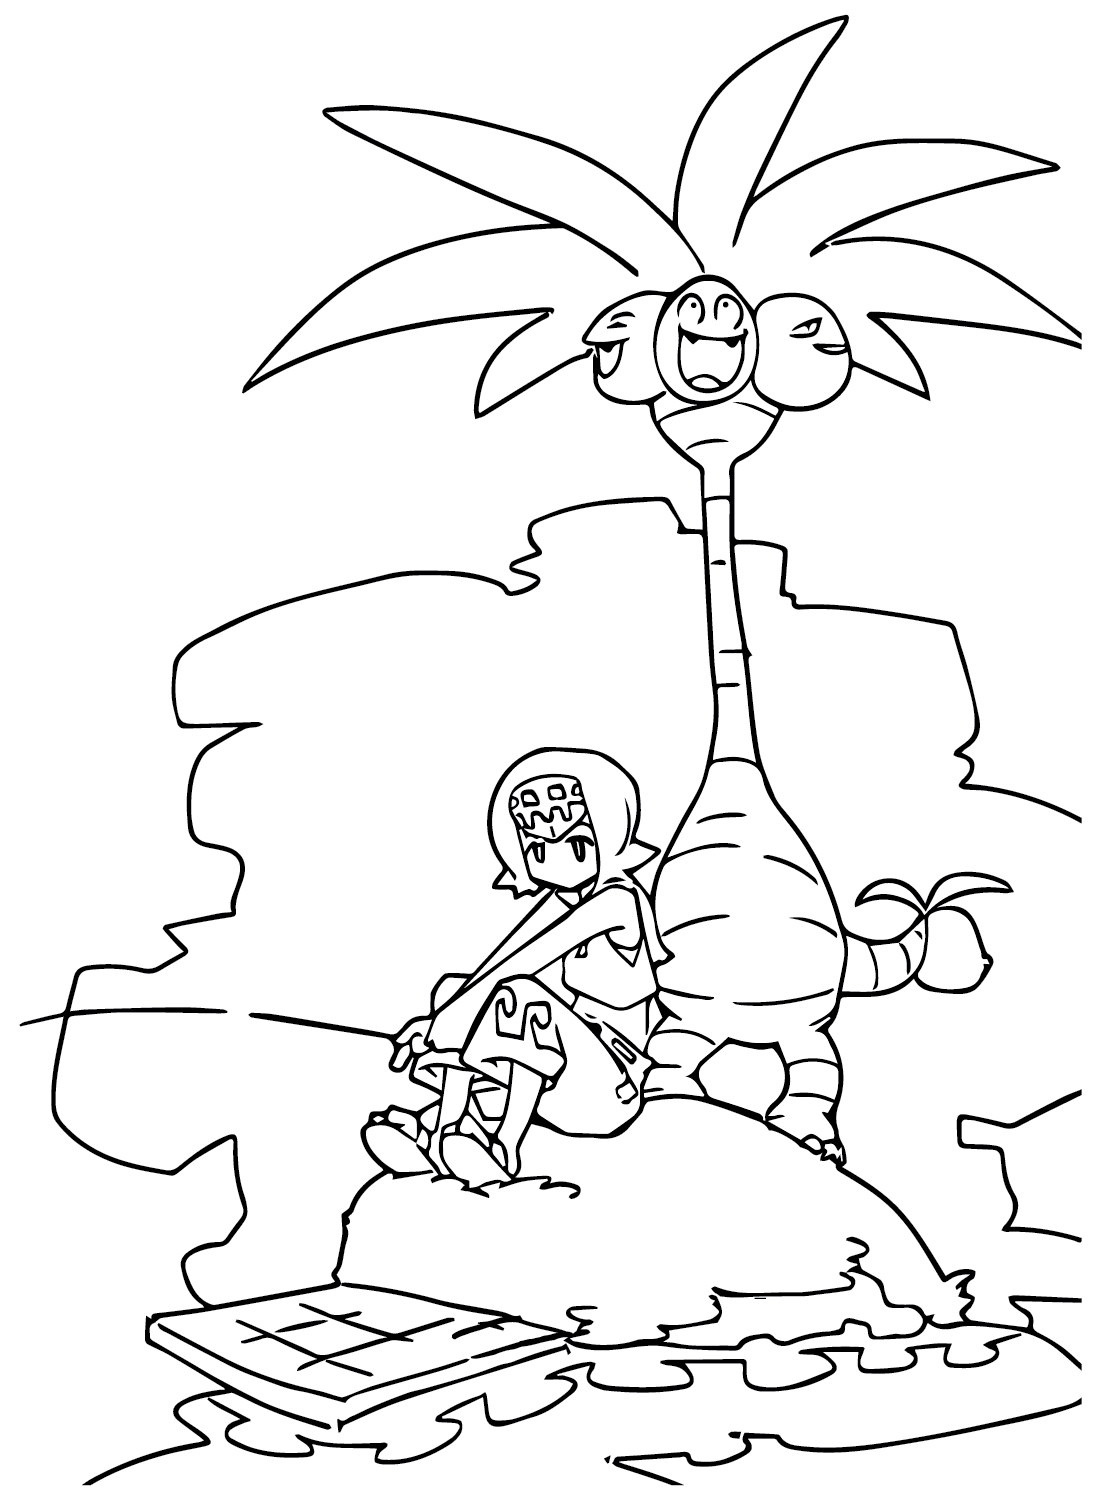 Lana Pokemon Coloring Pages to for Kids from Lana Pokemon